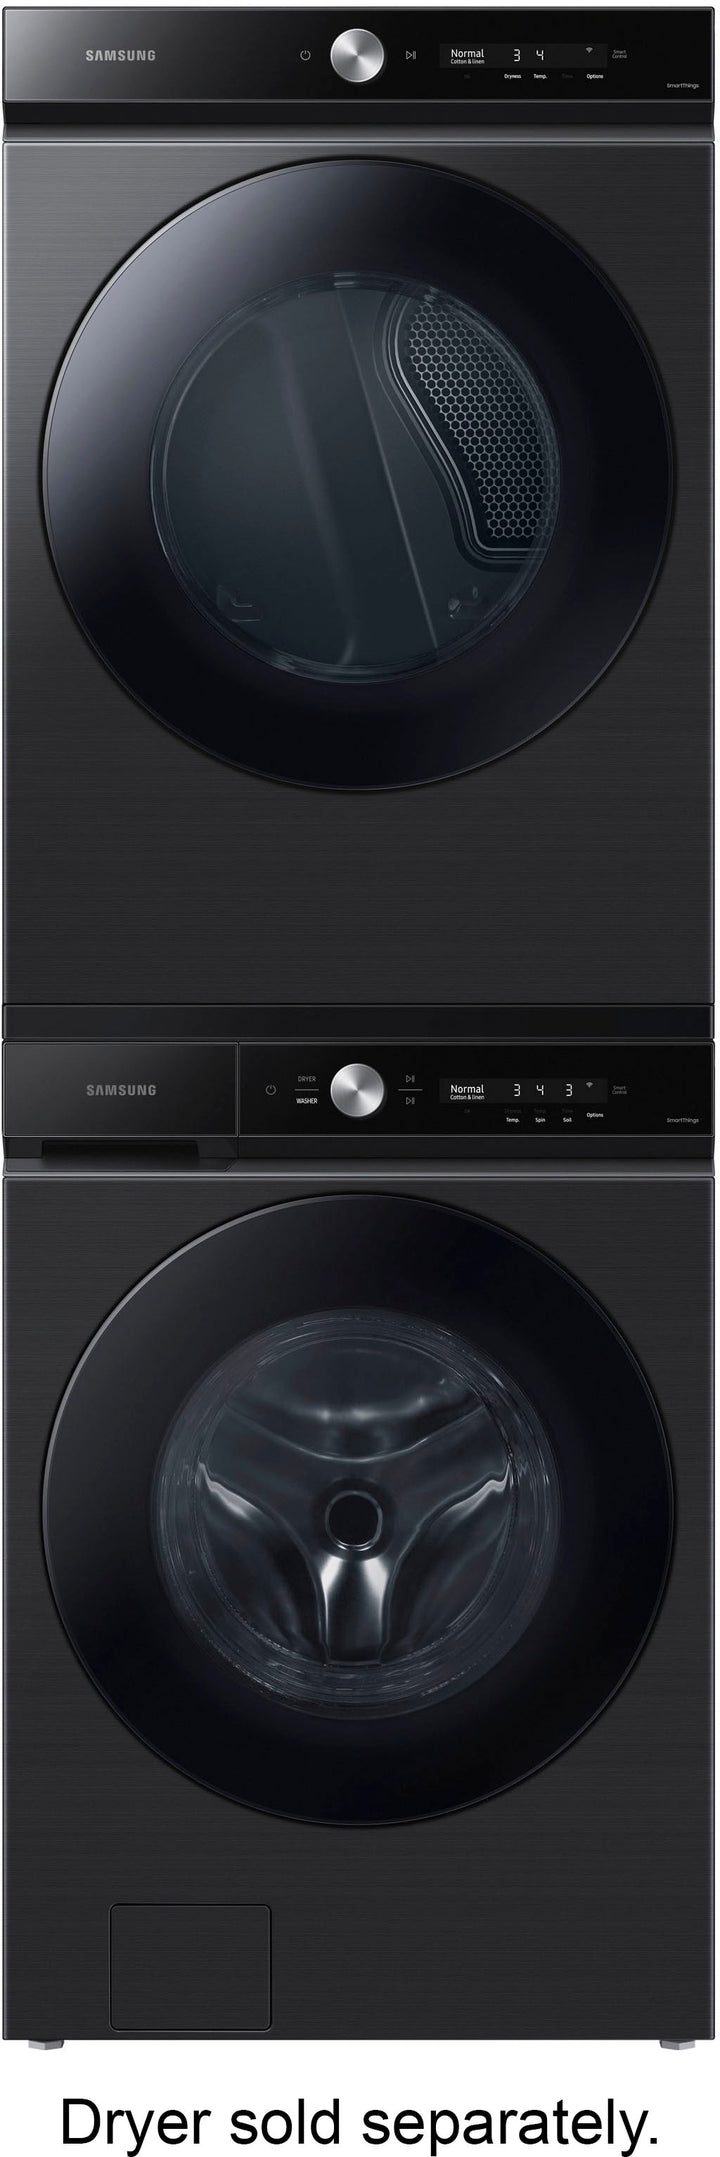 Samsung - Bespoke 5.3 cu. ft. Ultra Capacity Front Load Washer with Super Speed Wash and AI Smart Dial - Brushed black_10